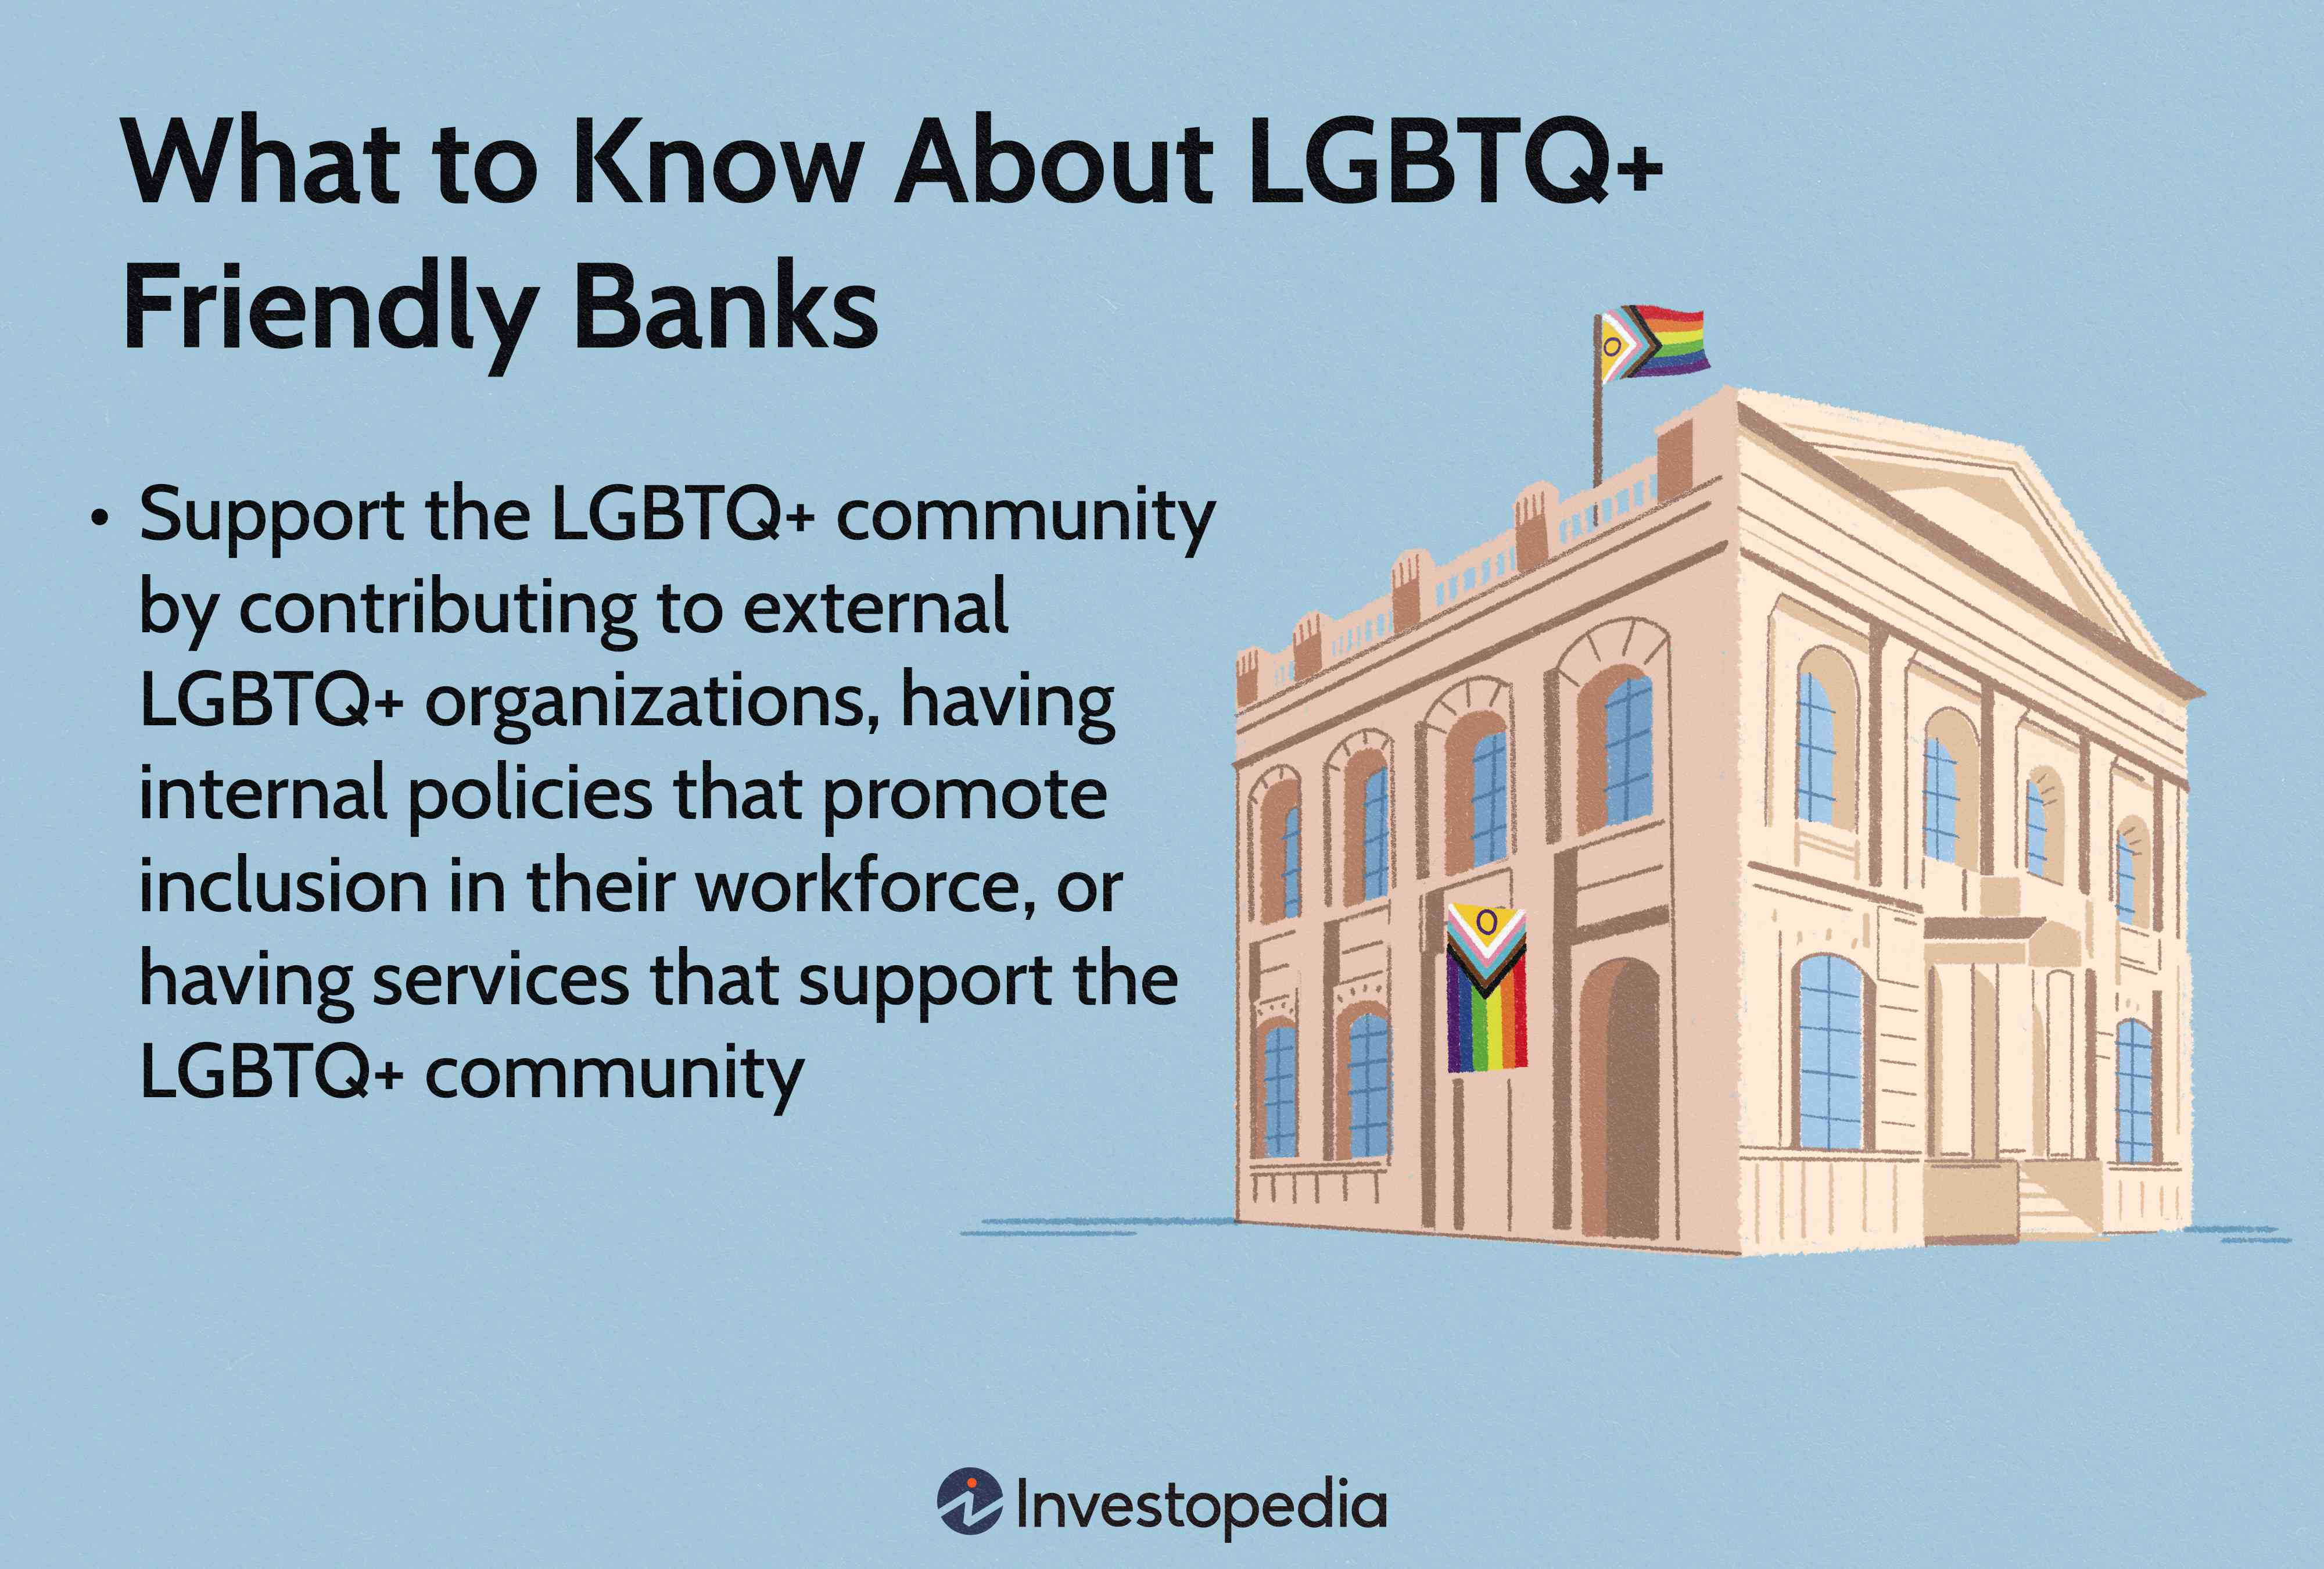 What to Know About LGBTQ+ Friendly Banks